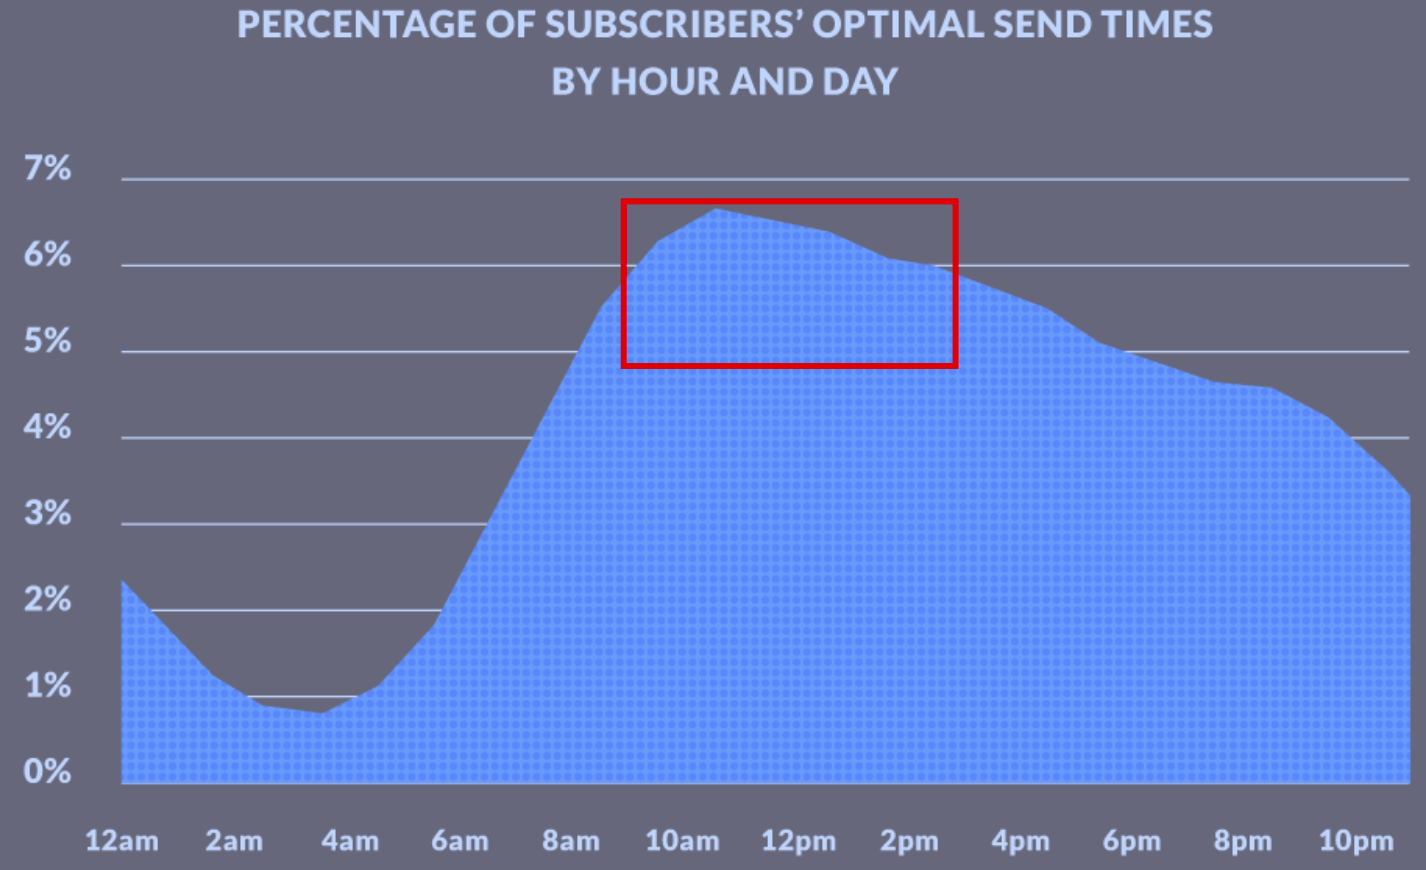 Most Popular Newsletter Frequency, According to the Data